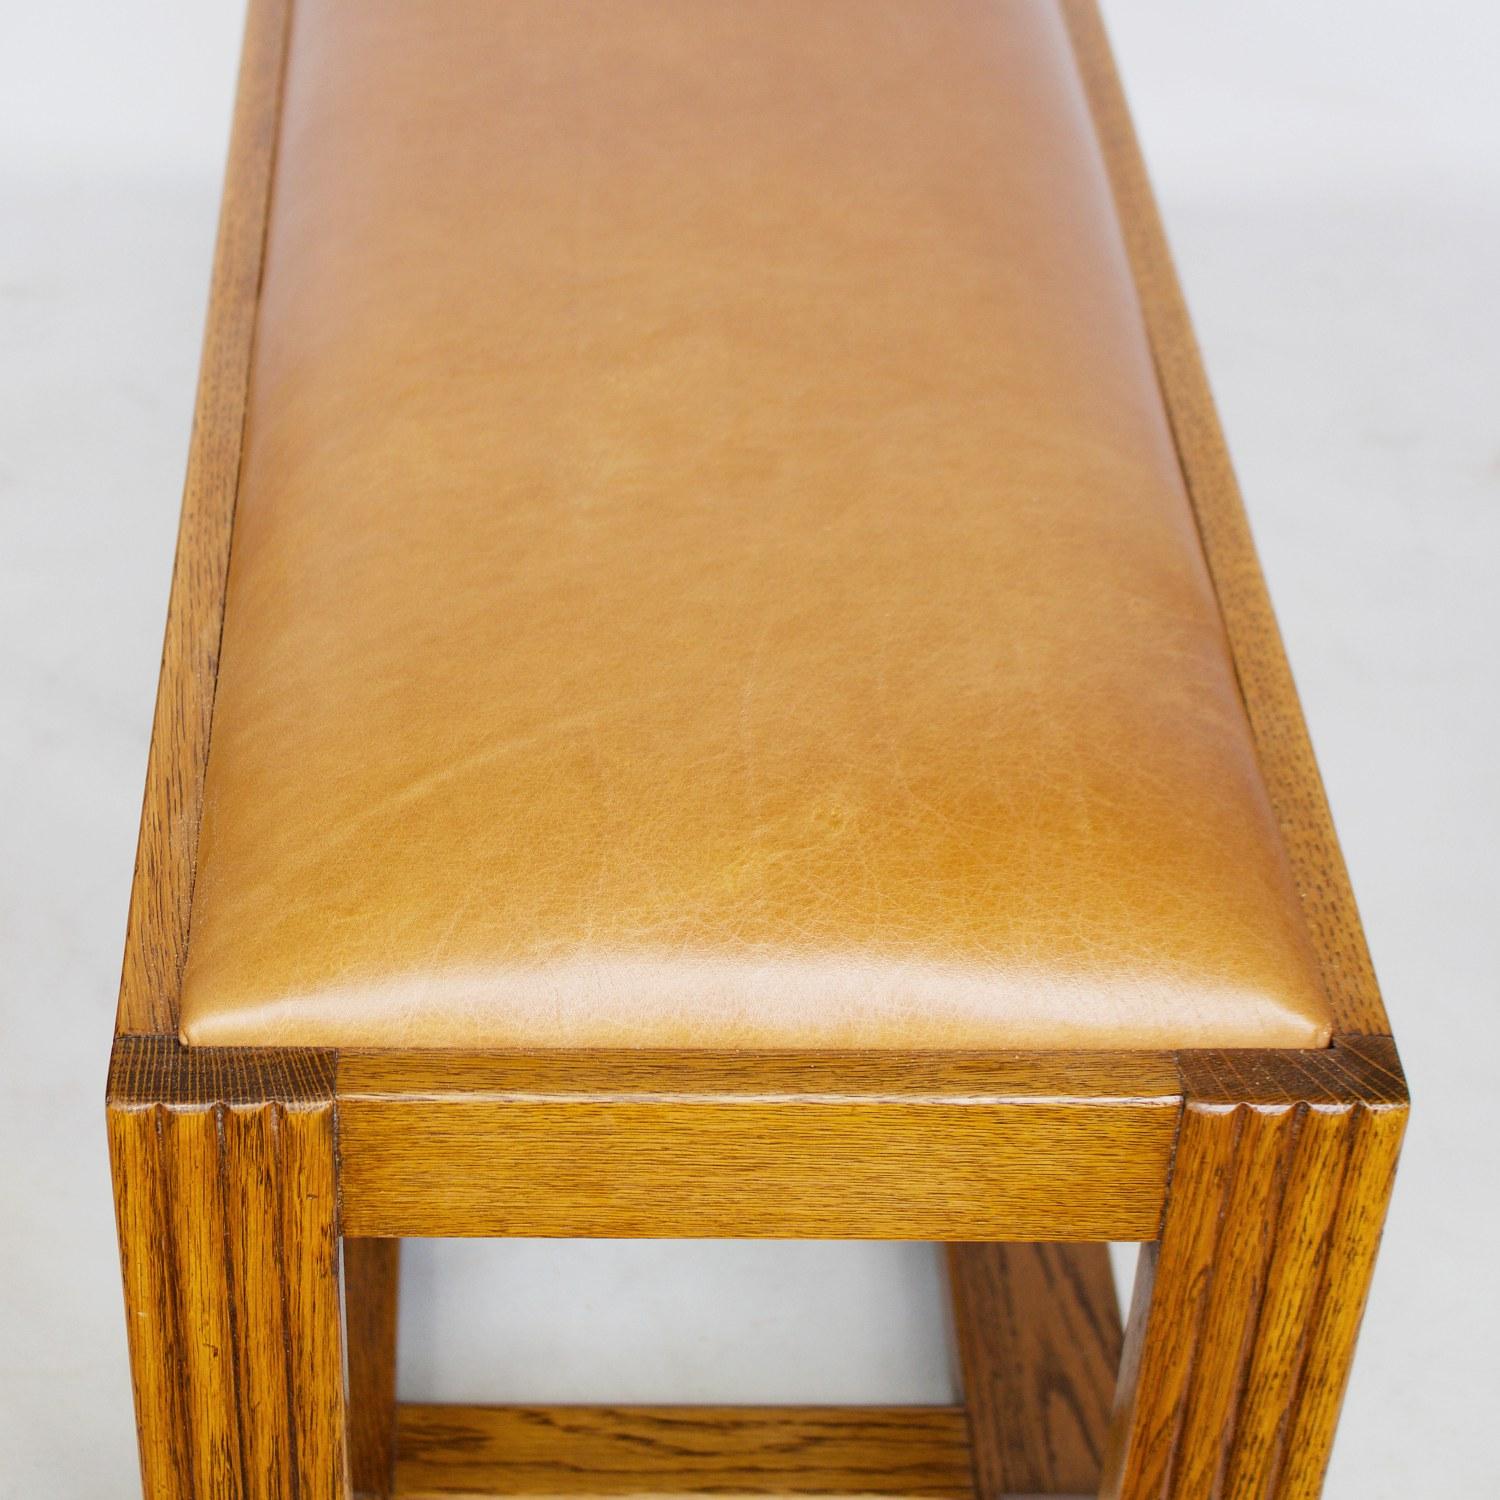 20th Century Pair of Art Deco Benches by Shepherd & Hedger, English, circa 1920